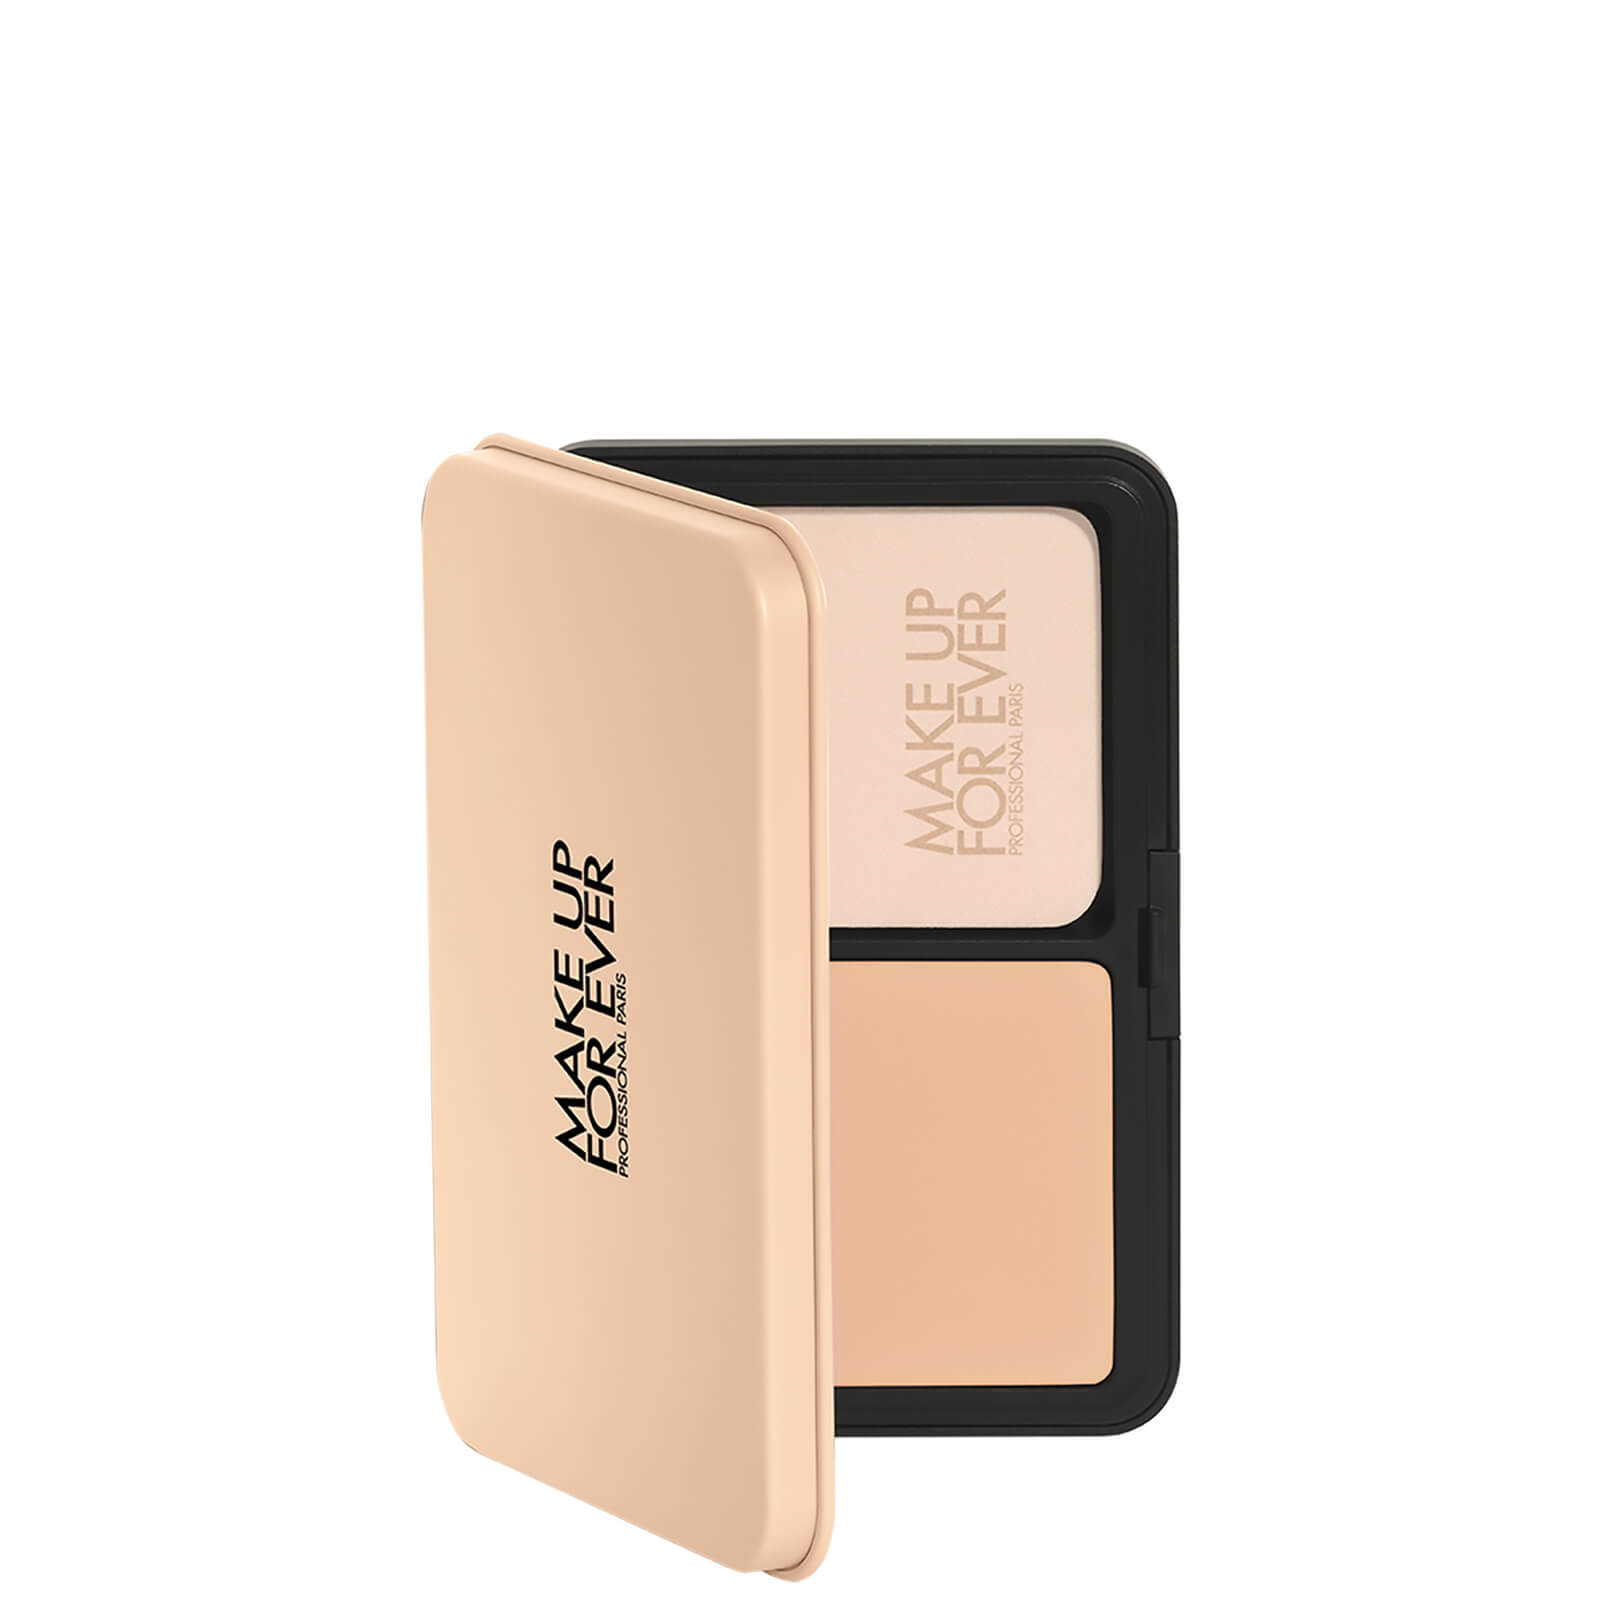 MAKE UP FOR EVER HD SKIN Powder Foundation 11g (Various Shades) - 1Y16